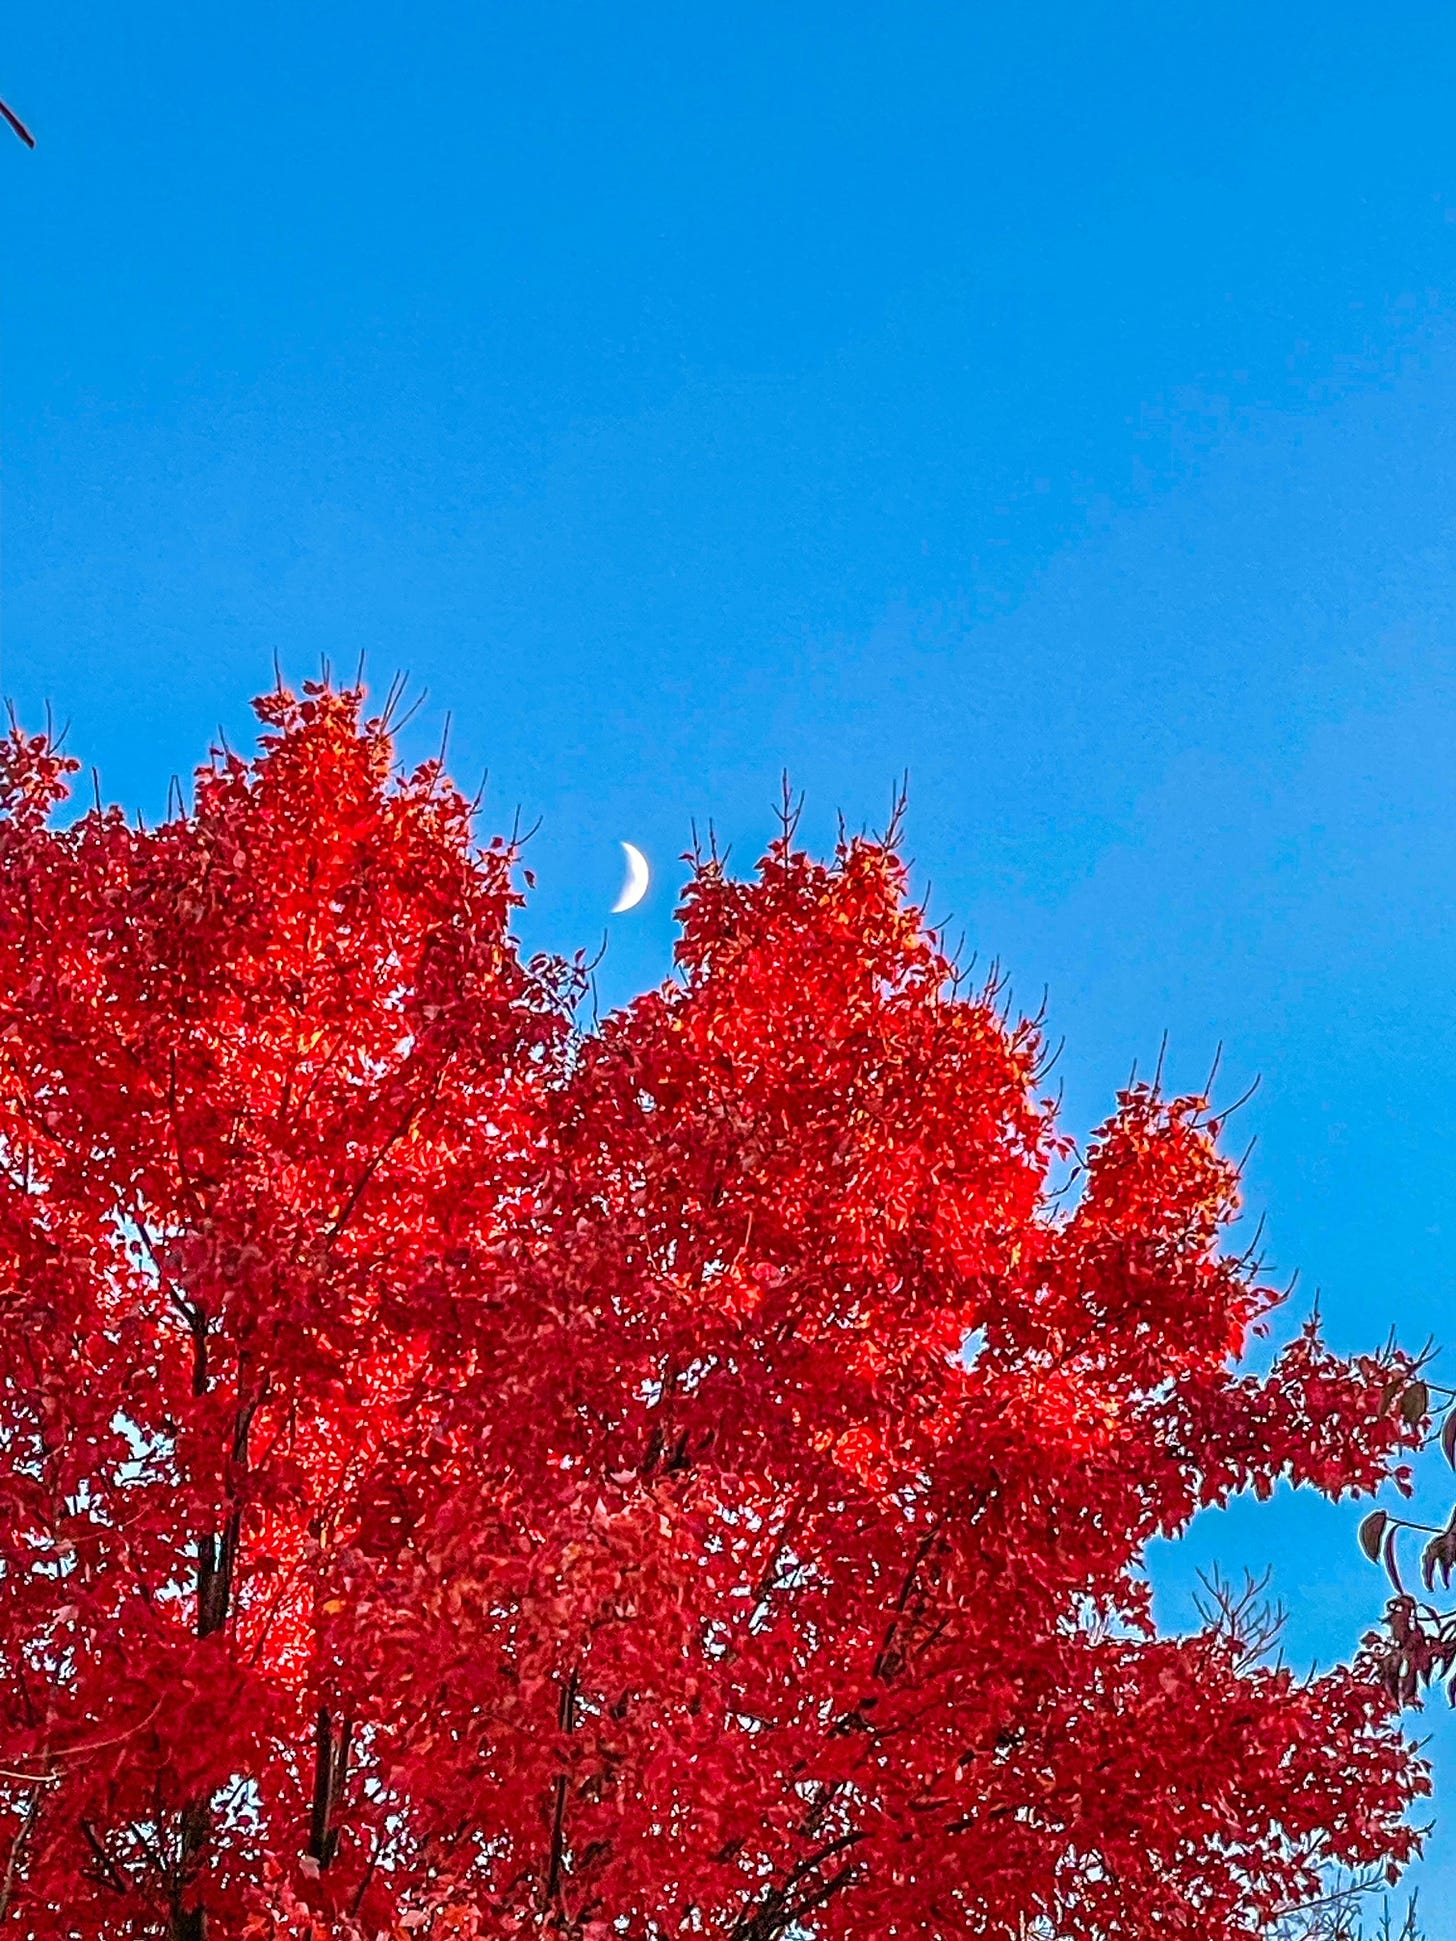 Picture of the crescent moon seen through the branches of a fiery, bright-red autumn tree